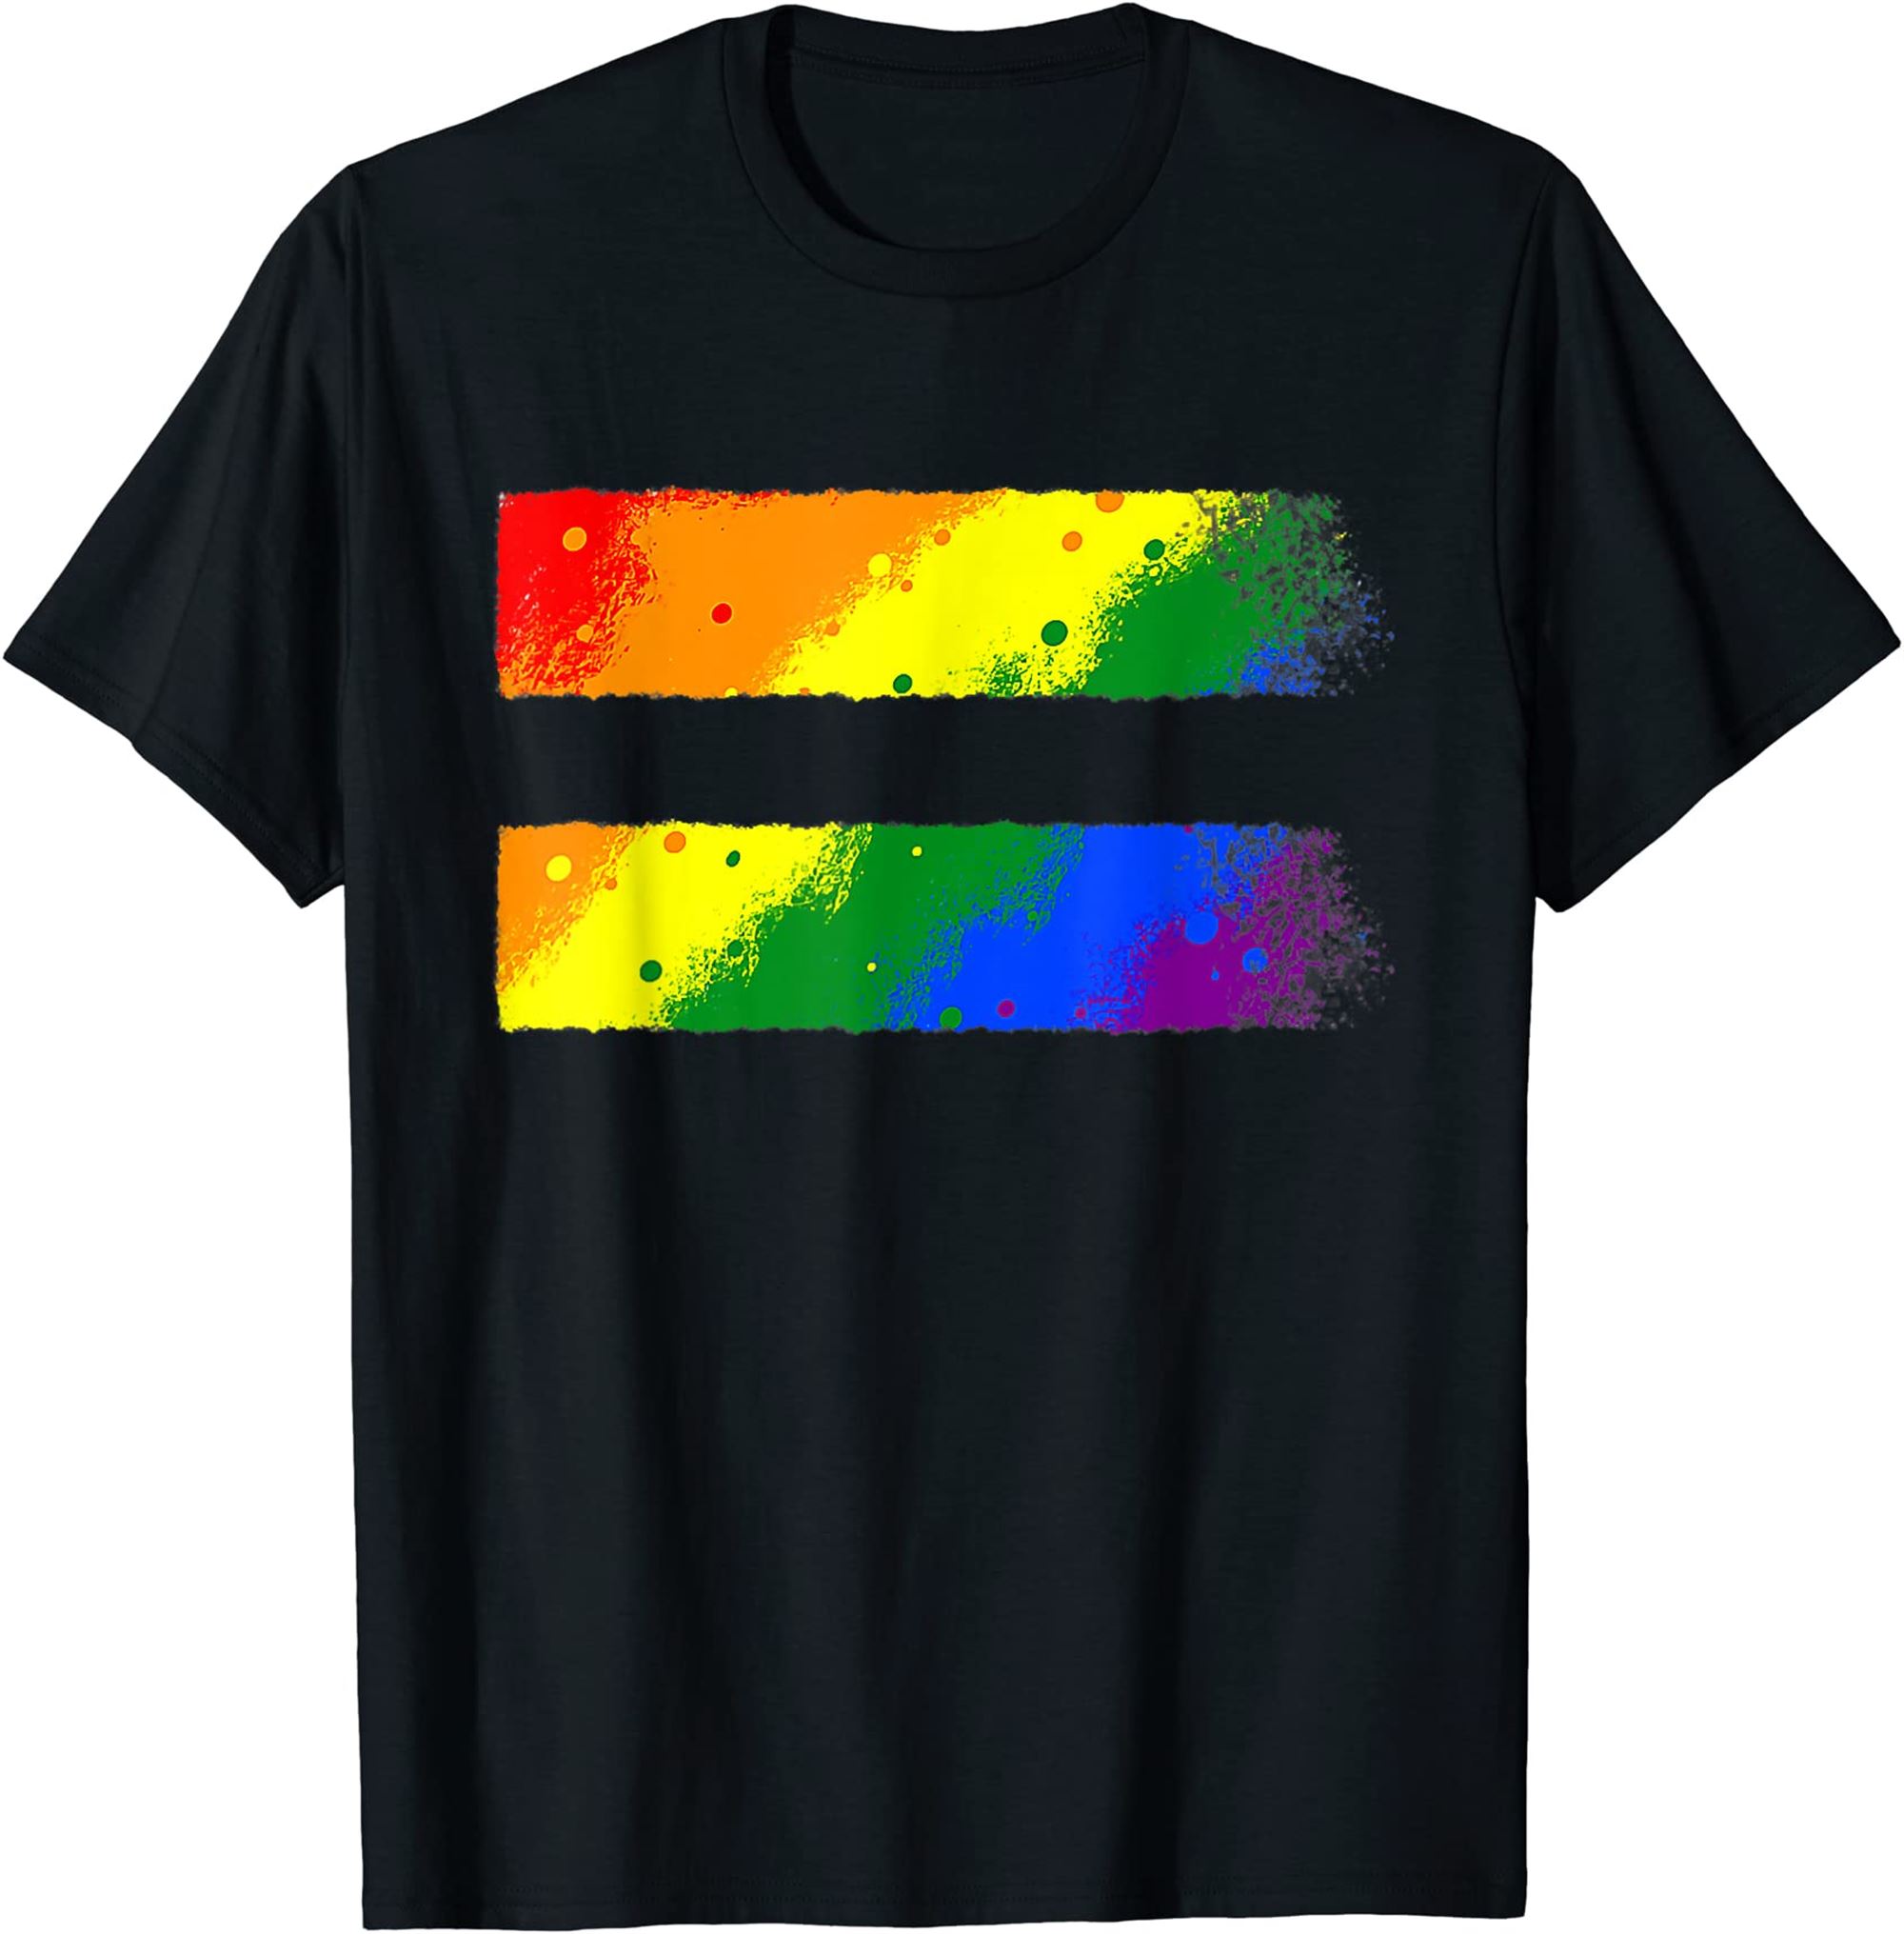 Equality Lgbt Pride Awareness For Gay Lesbian Equal Sign T-shirt Full Size Up To 5xl